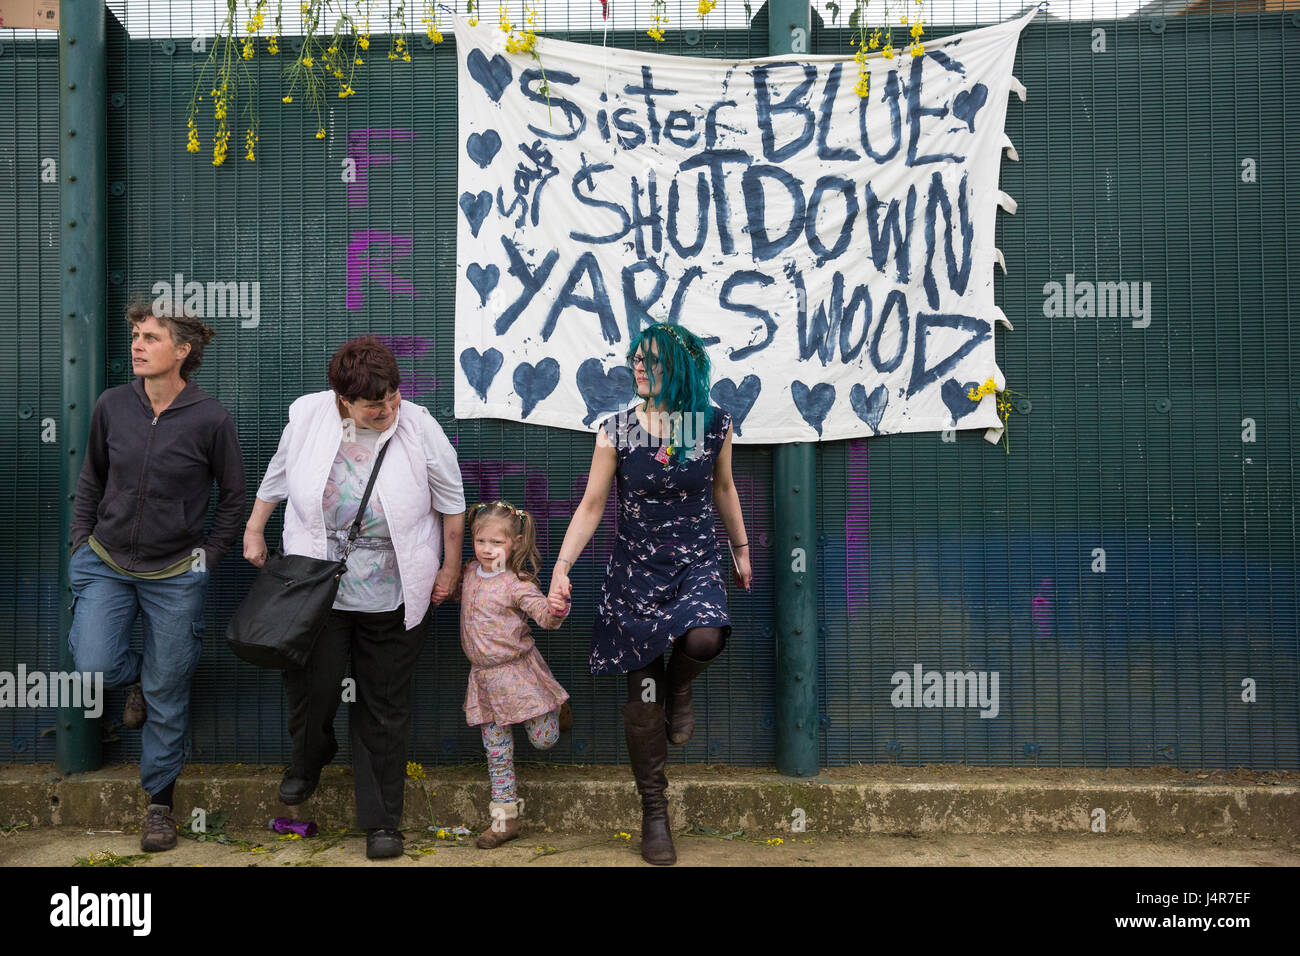 Milton Ernest, UK. 13th May, 2017. Campaigners against immigration detention kick the perimeter fence of Yarl's Wood Immigration Removal Centre during a protest organised by Movement For Justice By Any Means Necessary. Campaigners, including former detainees, called for all immigration detention centres to be closed. Credit: Mark Kerrison/Alamy Live News Stock Photo